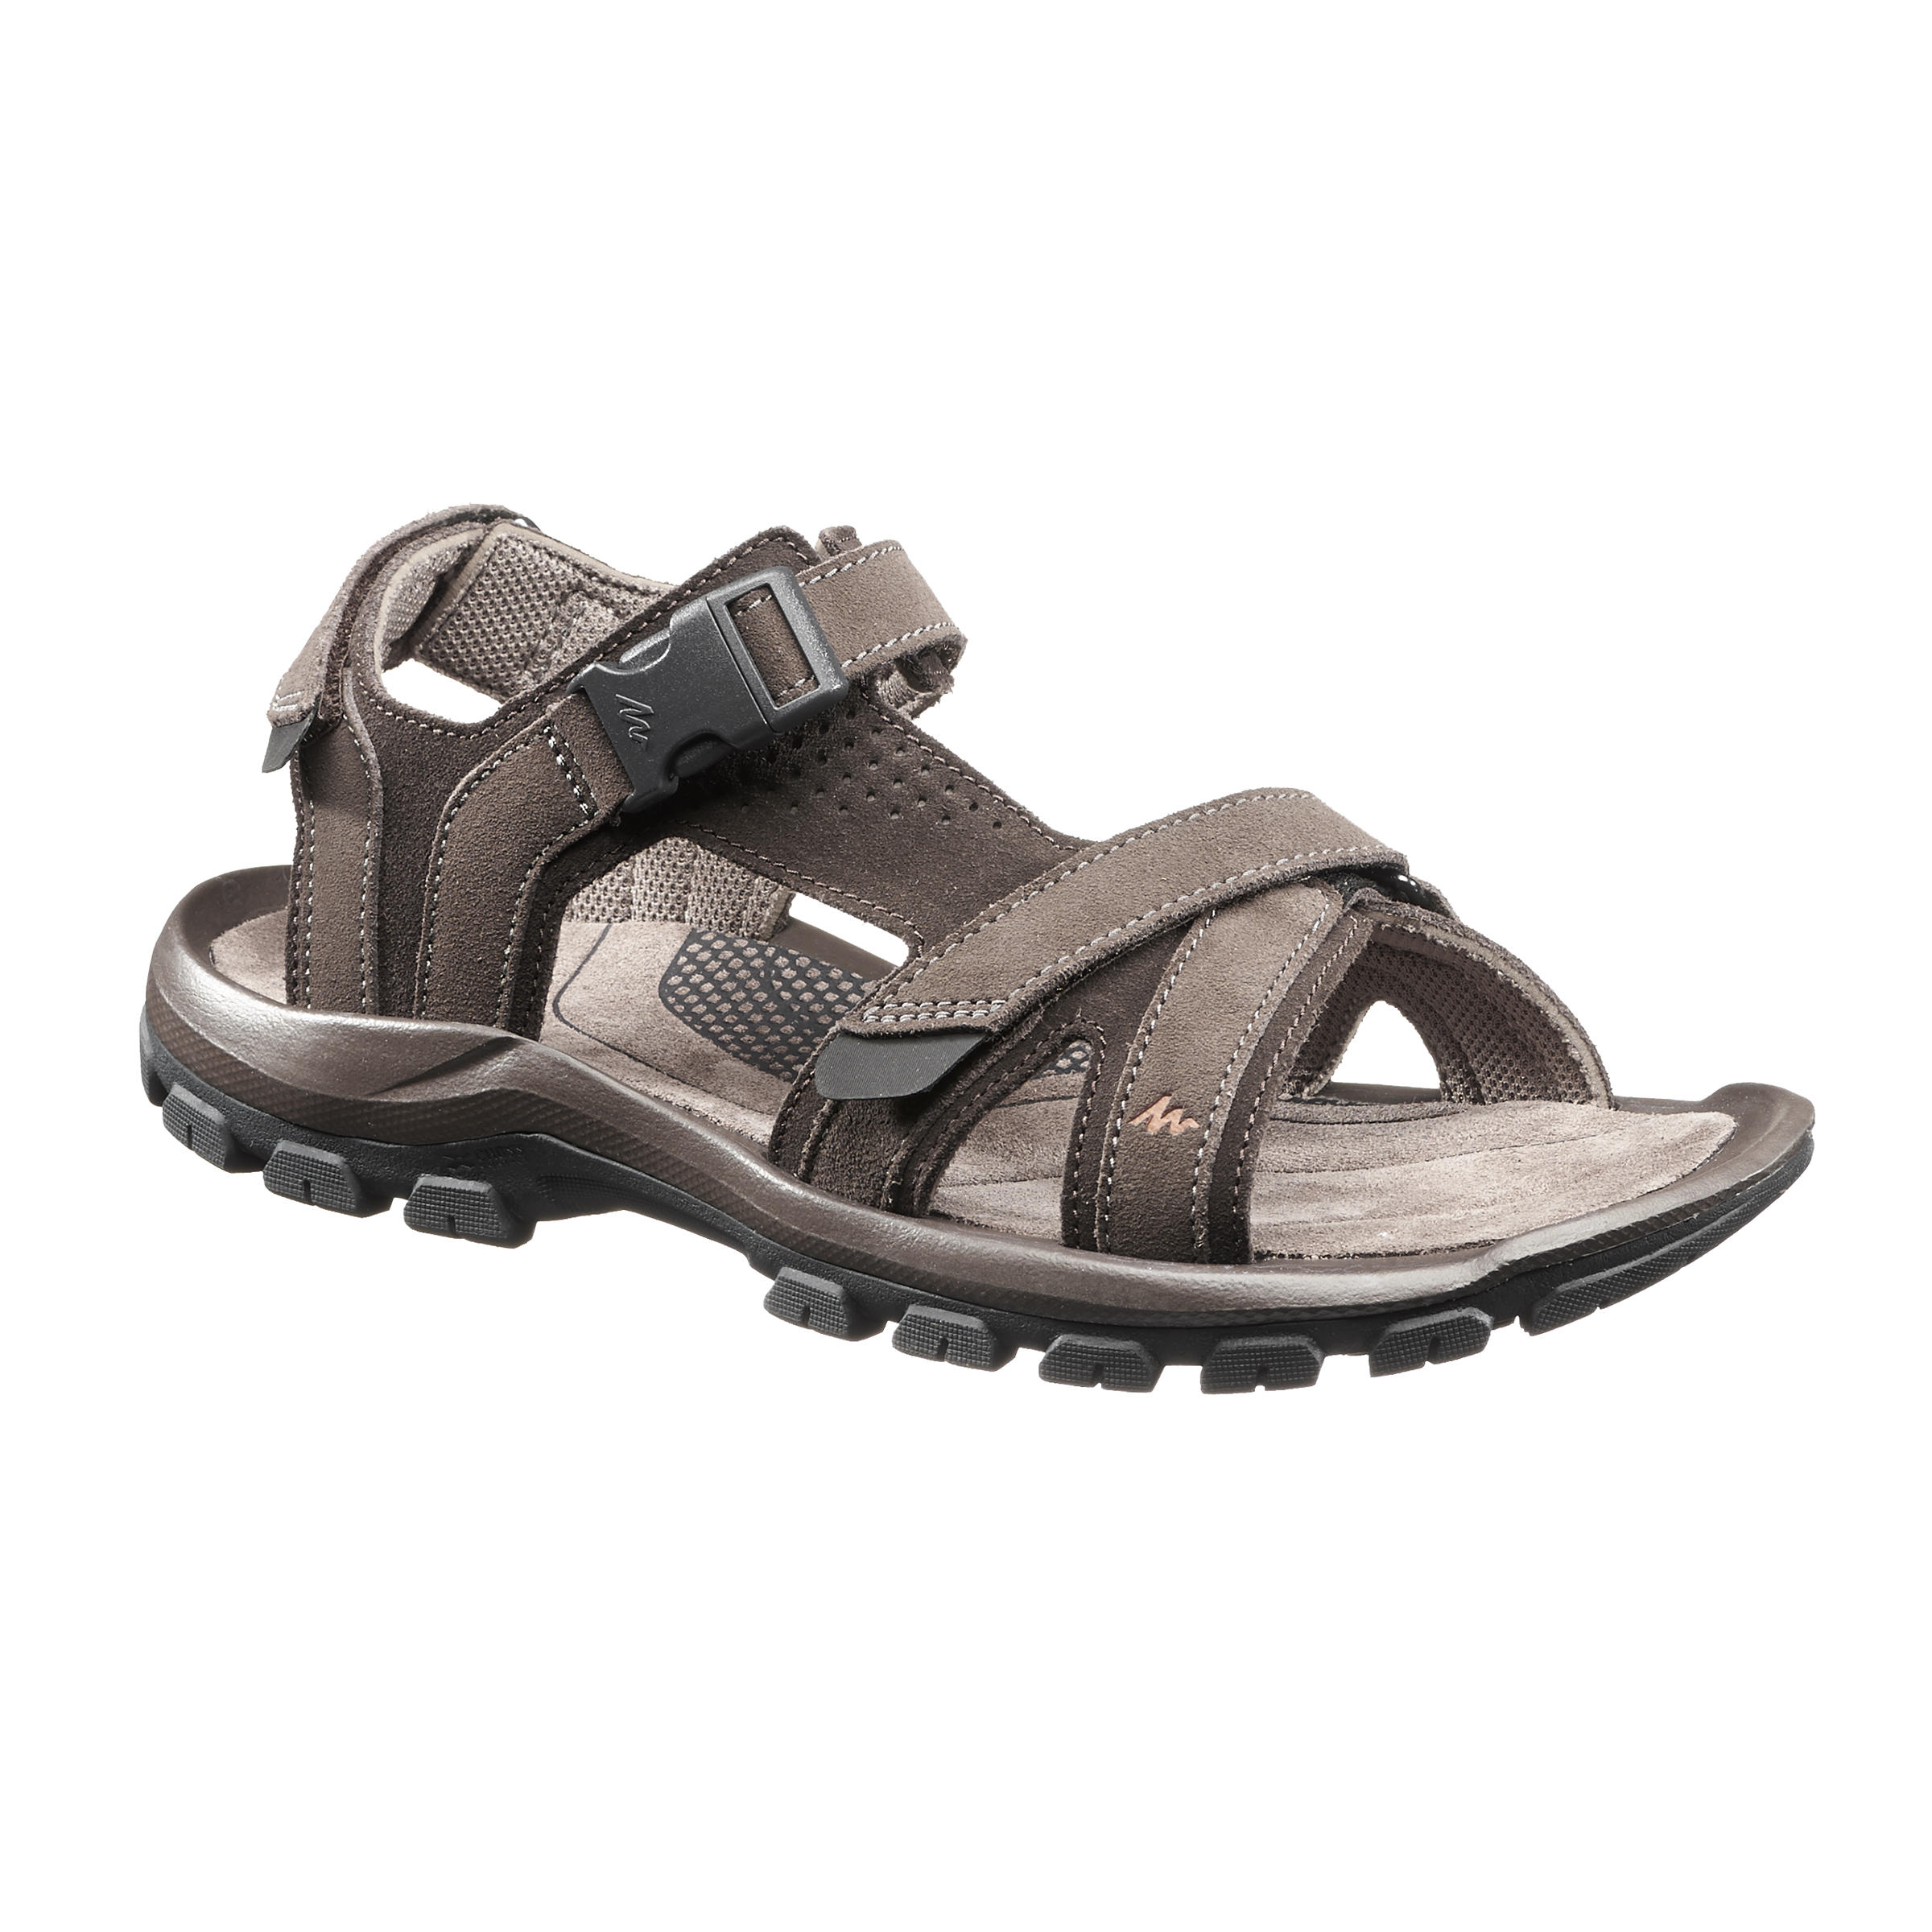 Men's Leather Sandals TO 900L - Black | Fitness Mania